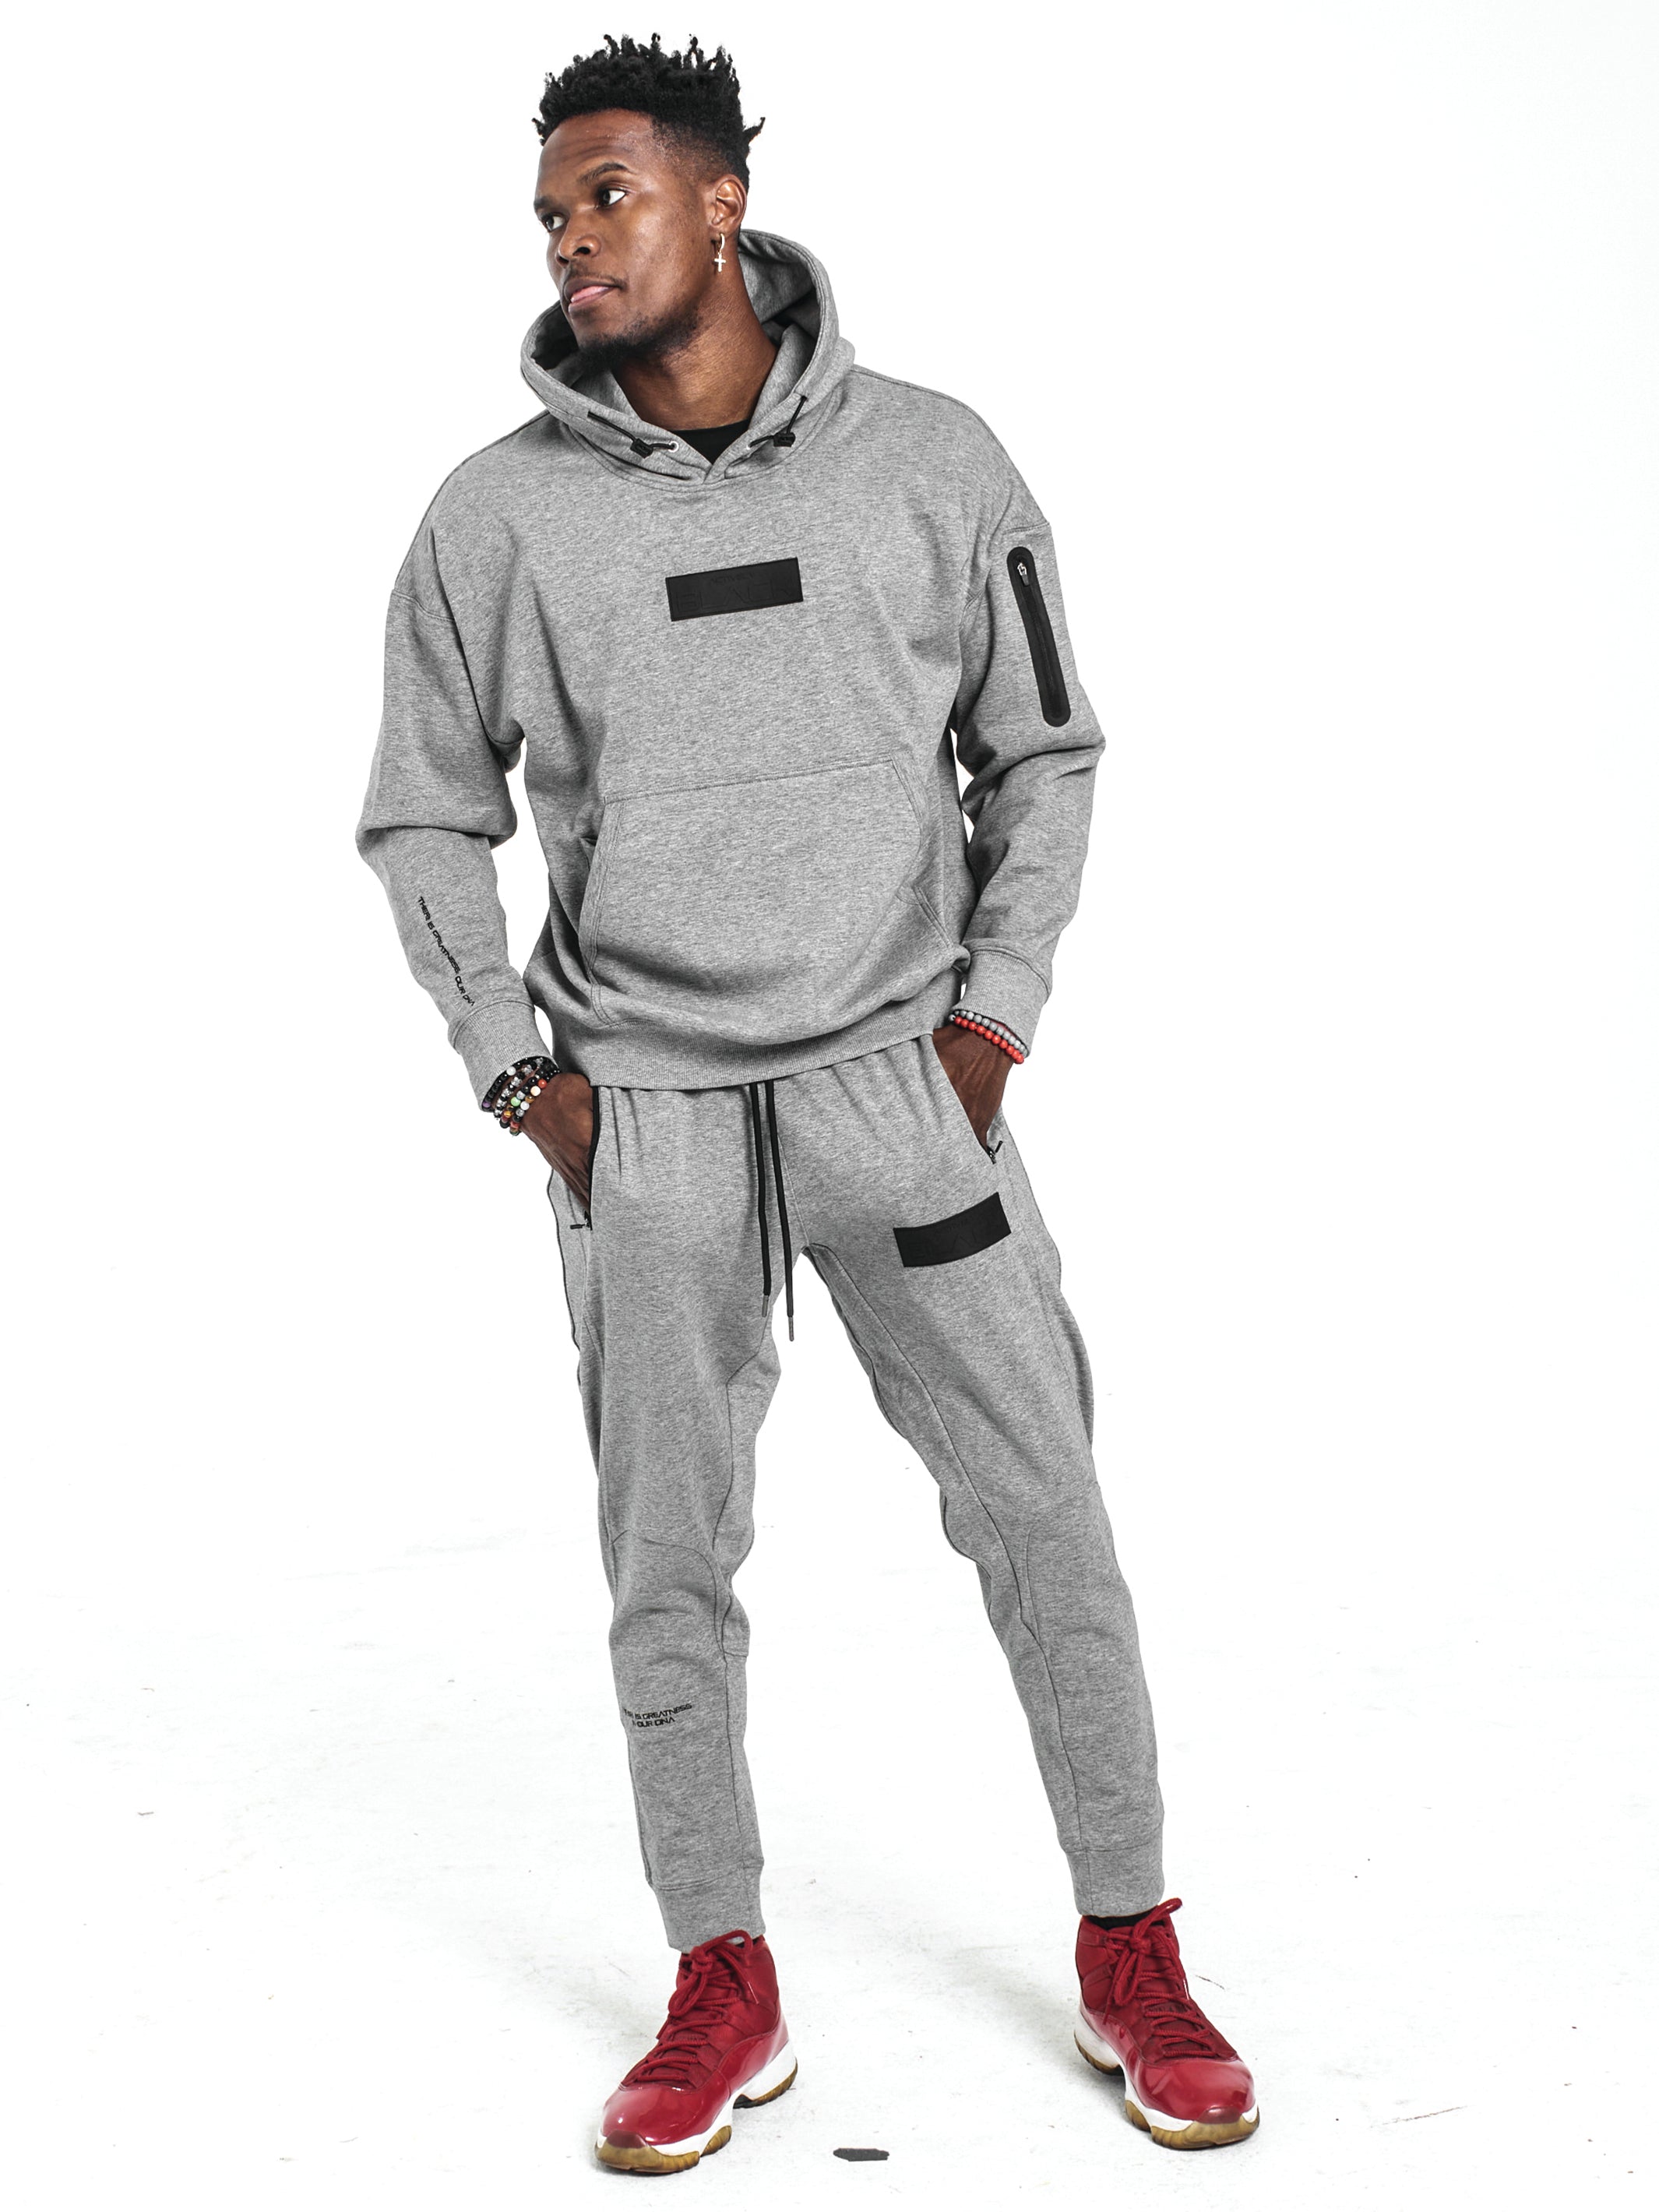 Grey Sweatpants with rubberized patch